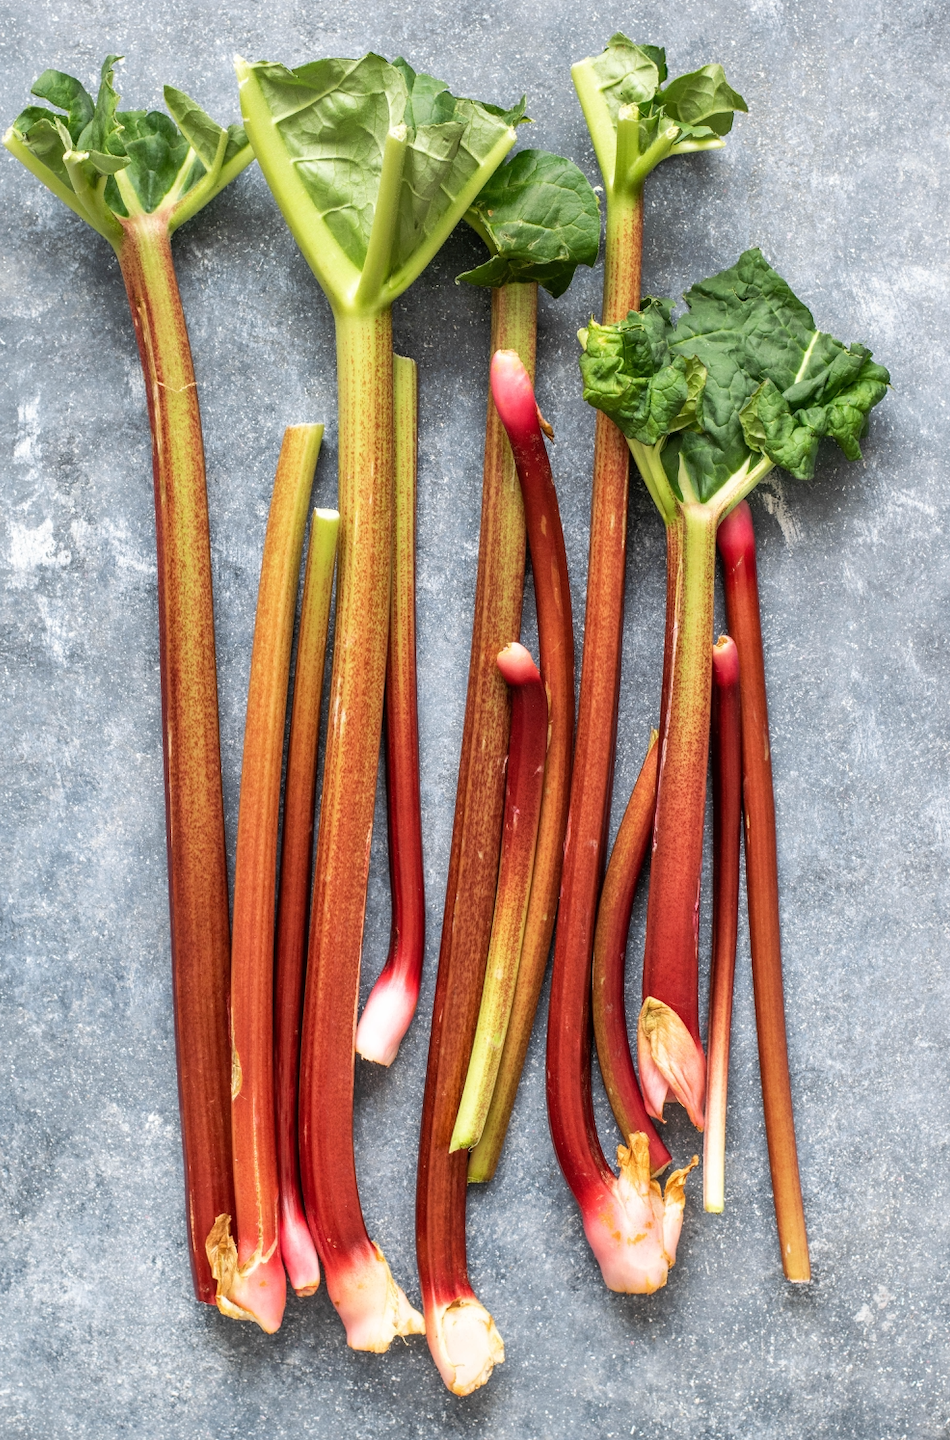 Facts and history about Rhubarb